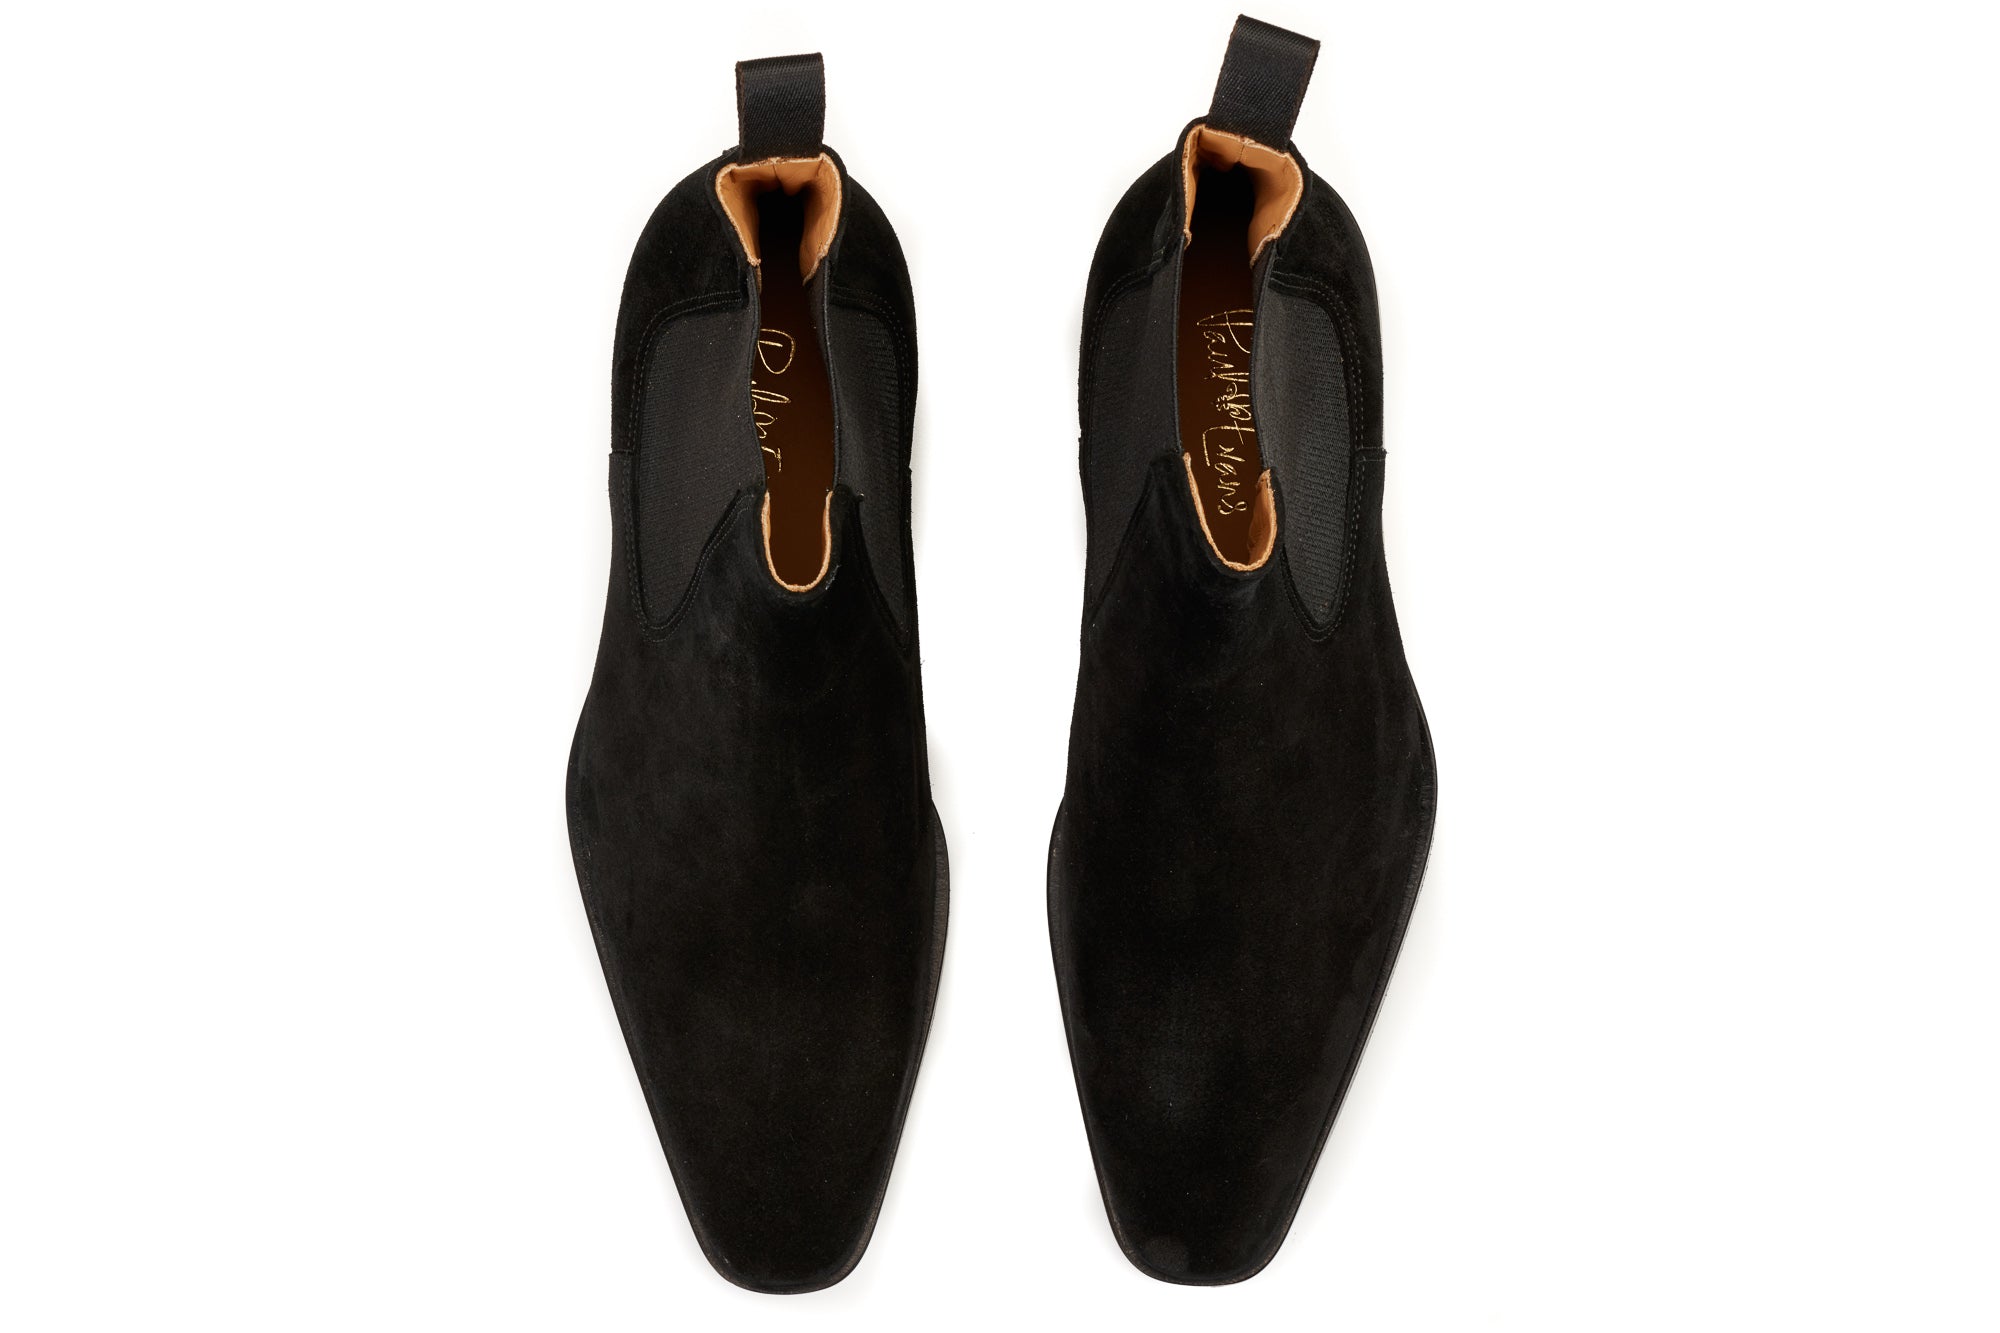 The Dean Chelsea Boot - Nero Suede